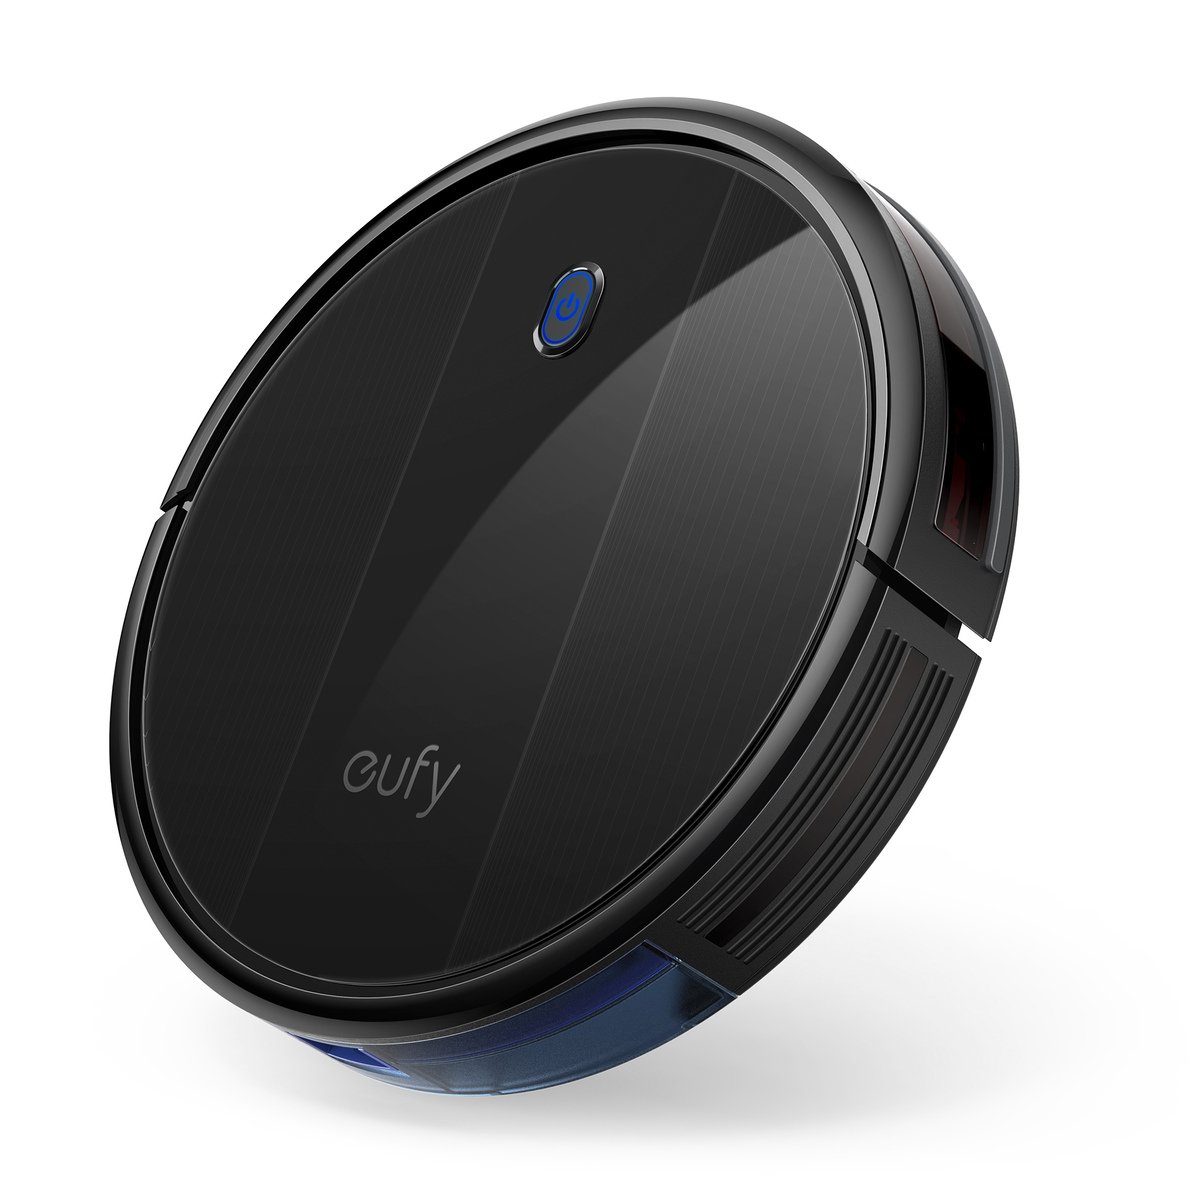 Eufy RoboVac R450-T2110V11 Robotic Vacuum Cleaner,Super-Thin, 1500Pa Strong Suction, Quiet, Self-Charging Robotic Vacuum Cleaner, Cleans Hard Floors to Medium-Pile Carpets.